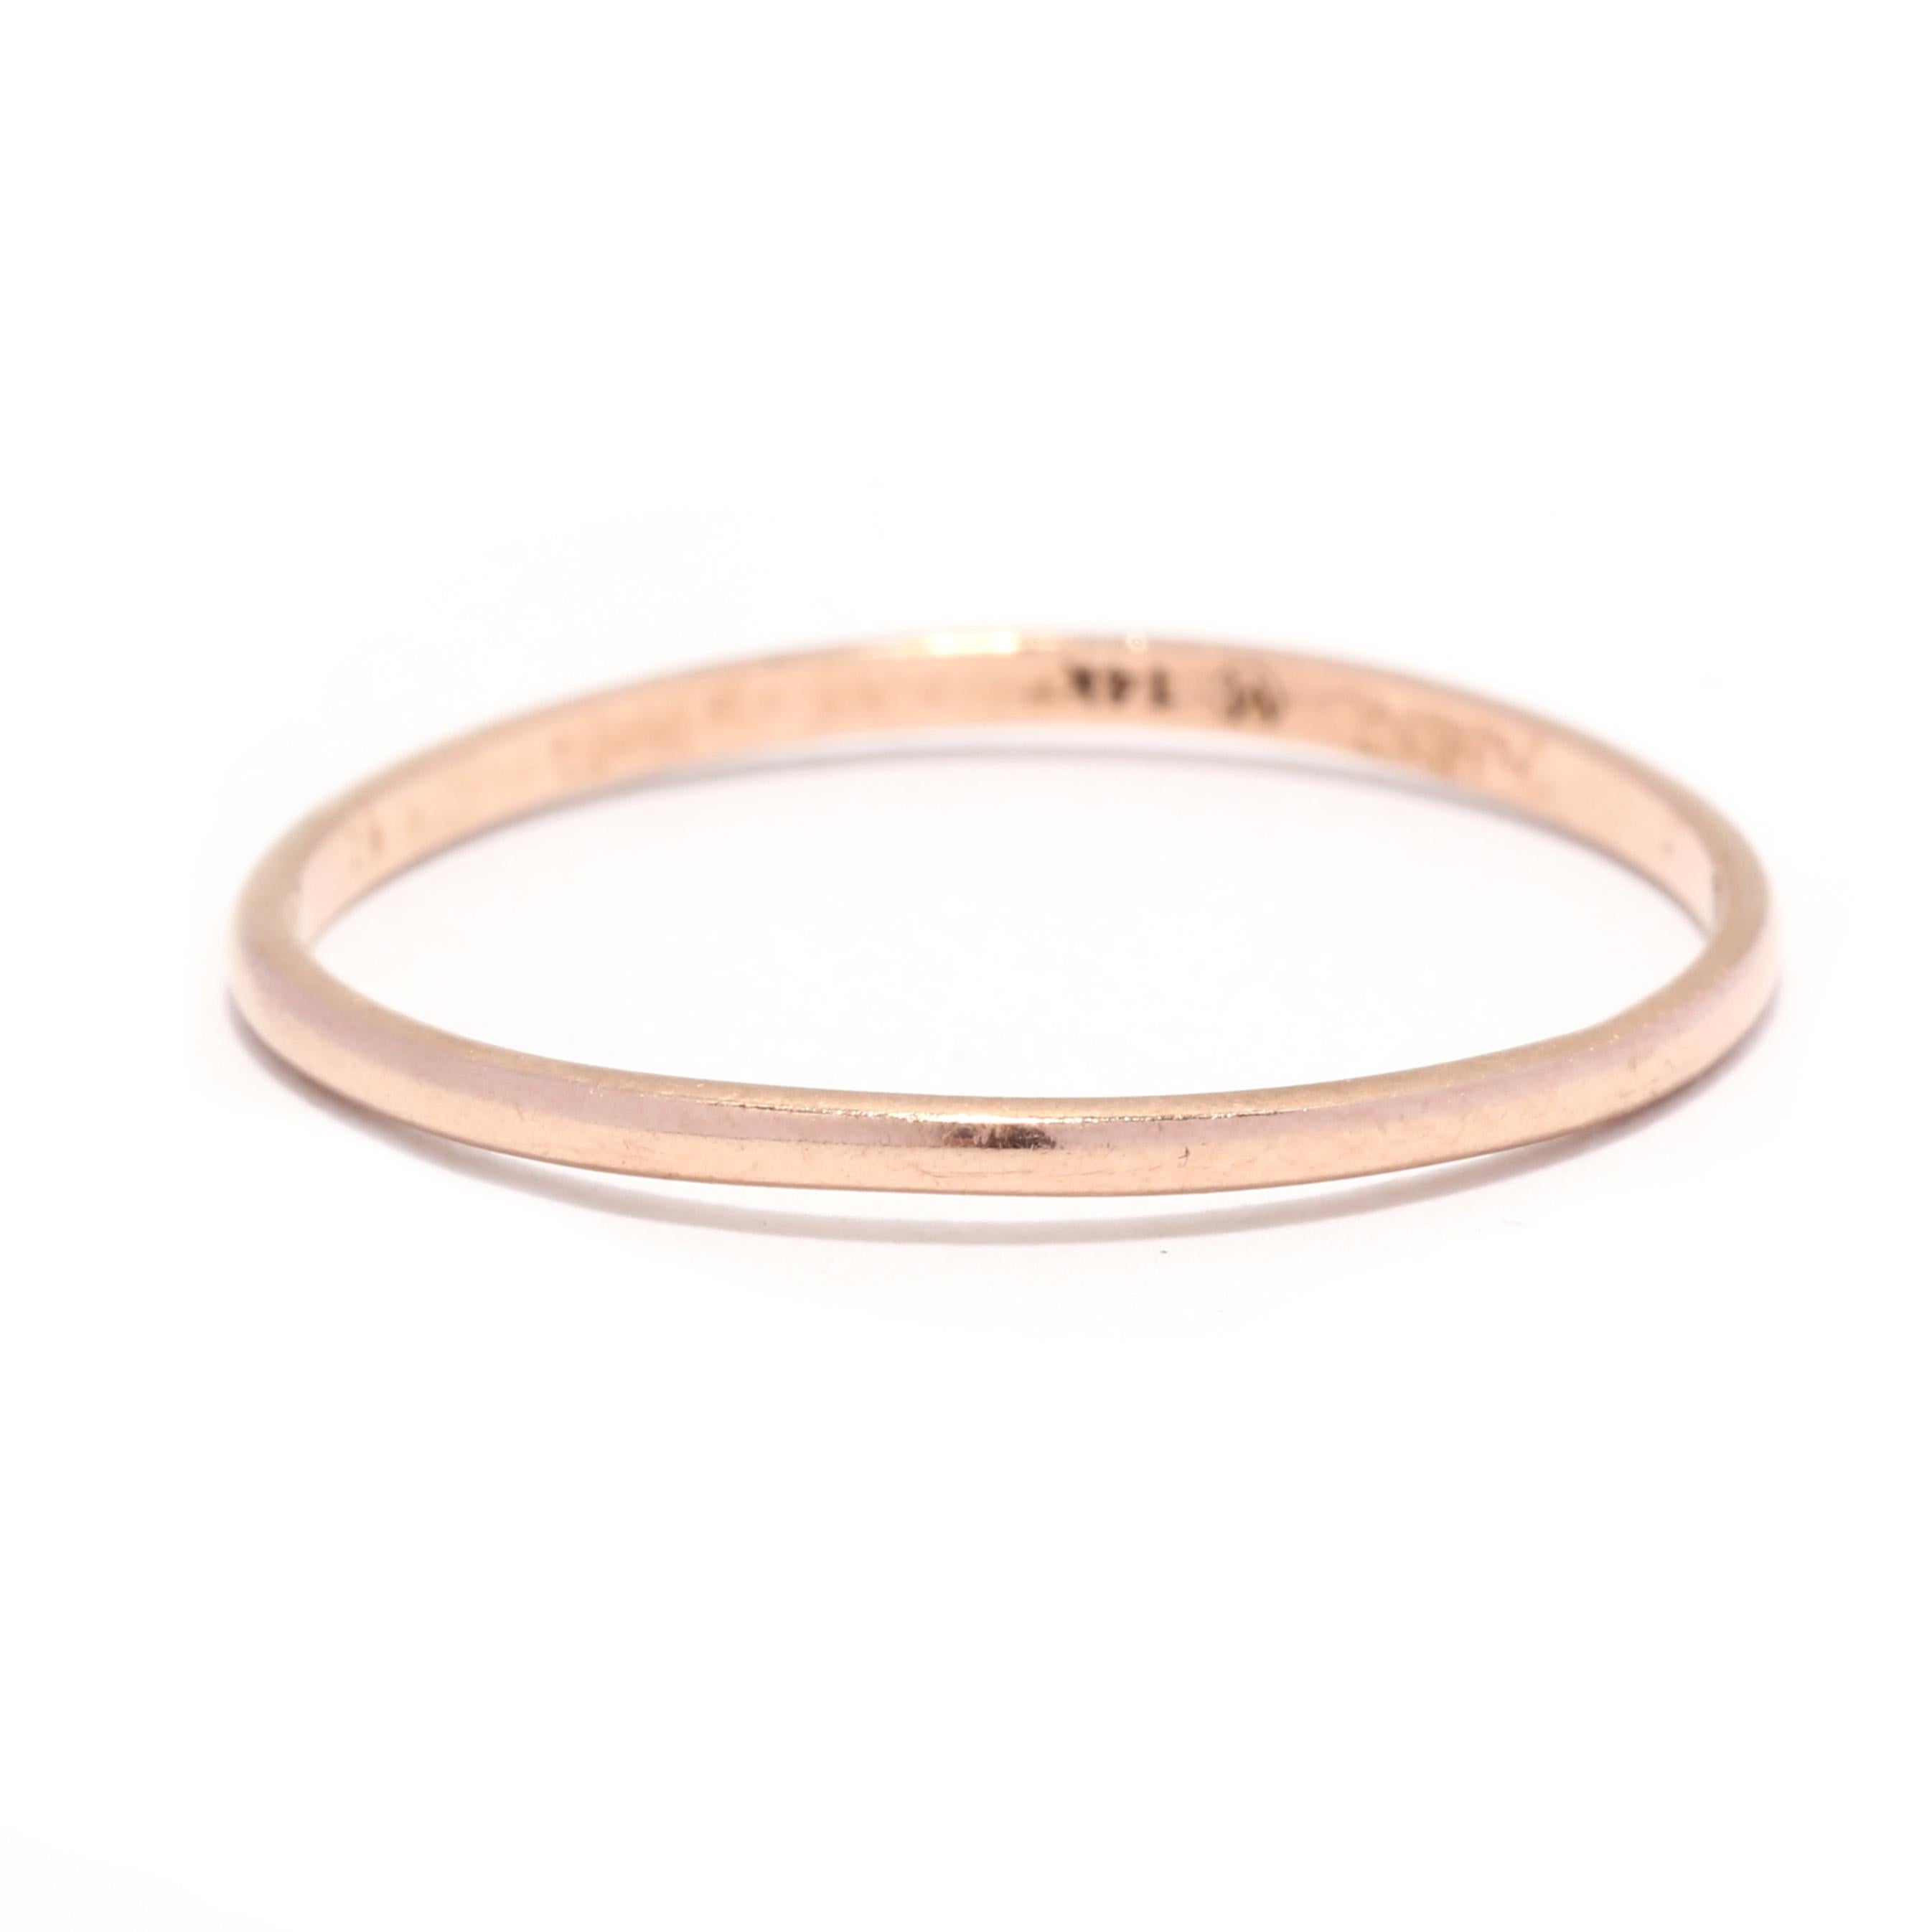 A 14 karat rose gold skinny band ring. This ring features a slightly domed, thin stackable band design.

Ring Size 8

Rise Off Of Finger: 1 mm

Width: 1.3 mm

Weight: .5 dwts. / .7 grams

Stamps: 14K

Ring Sizings & Modifications:
* We are happy to